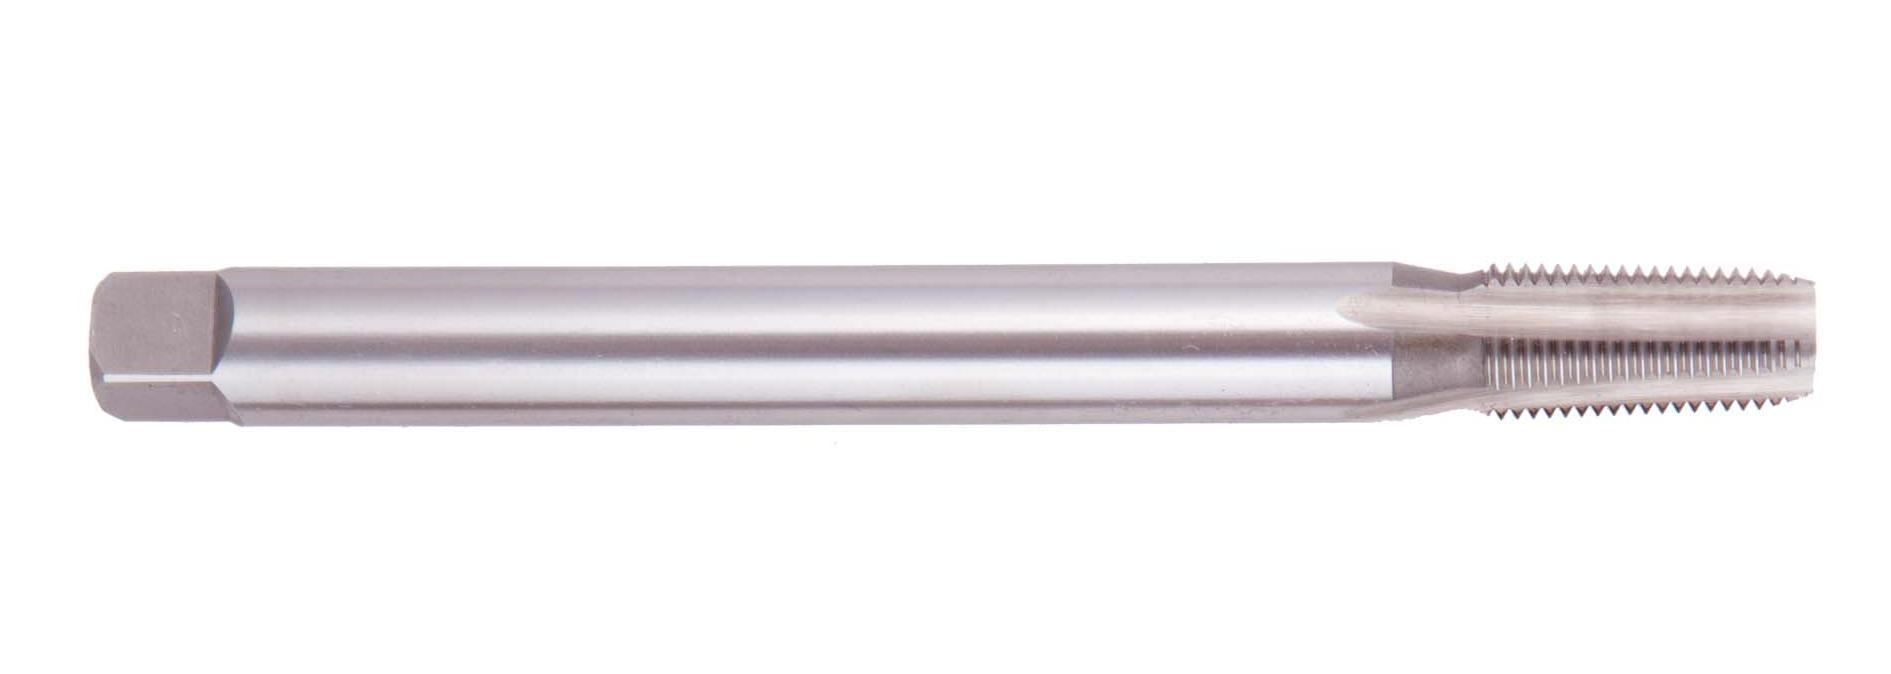 Extension Pipe Tap, 1/8-27 NPT, NPTF, 6 Inch Pipe, 5 Flutes, Plug With Nitride